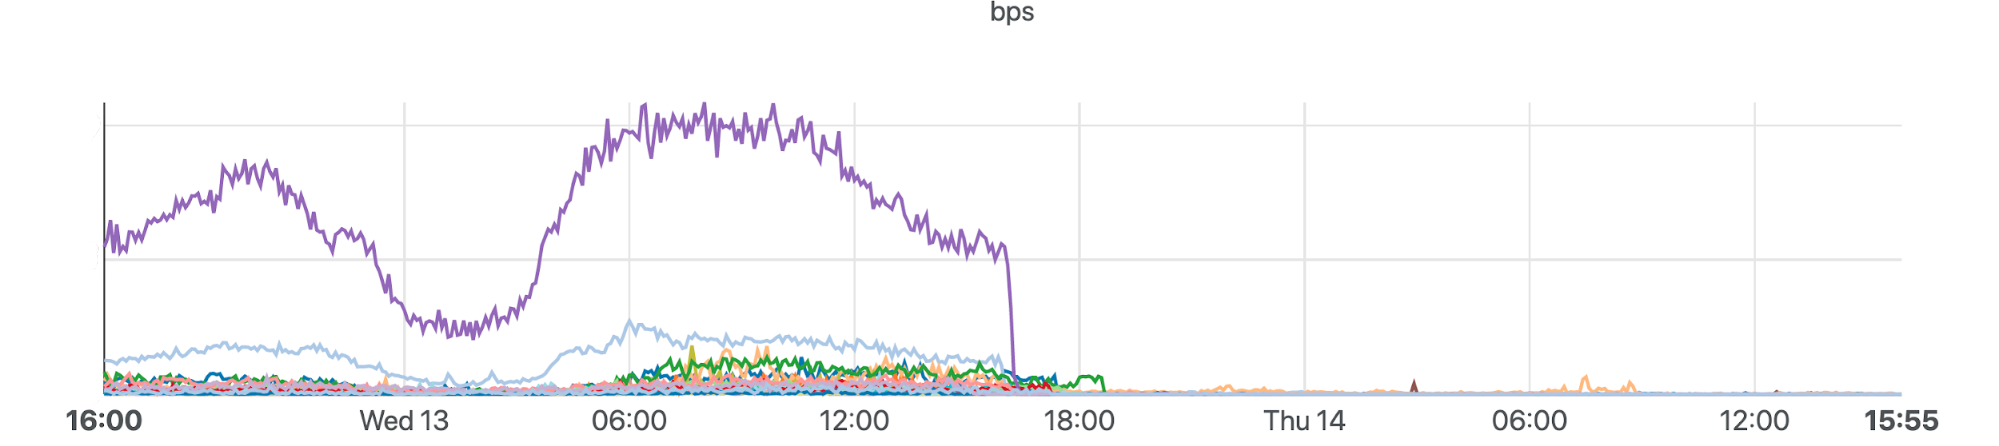 We keep an eye on traffic levels and BGP routing to our edge network, and are able to see which networks carry traffic to and from Uganda and their relative traffic levels. The cutoff is clear in those statistics also. Each colored line is a different network inside Uganda (such as ISPs, mobile providers, etc.)